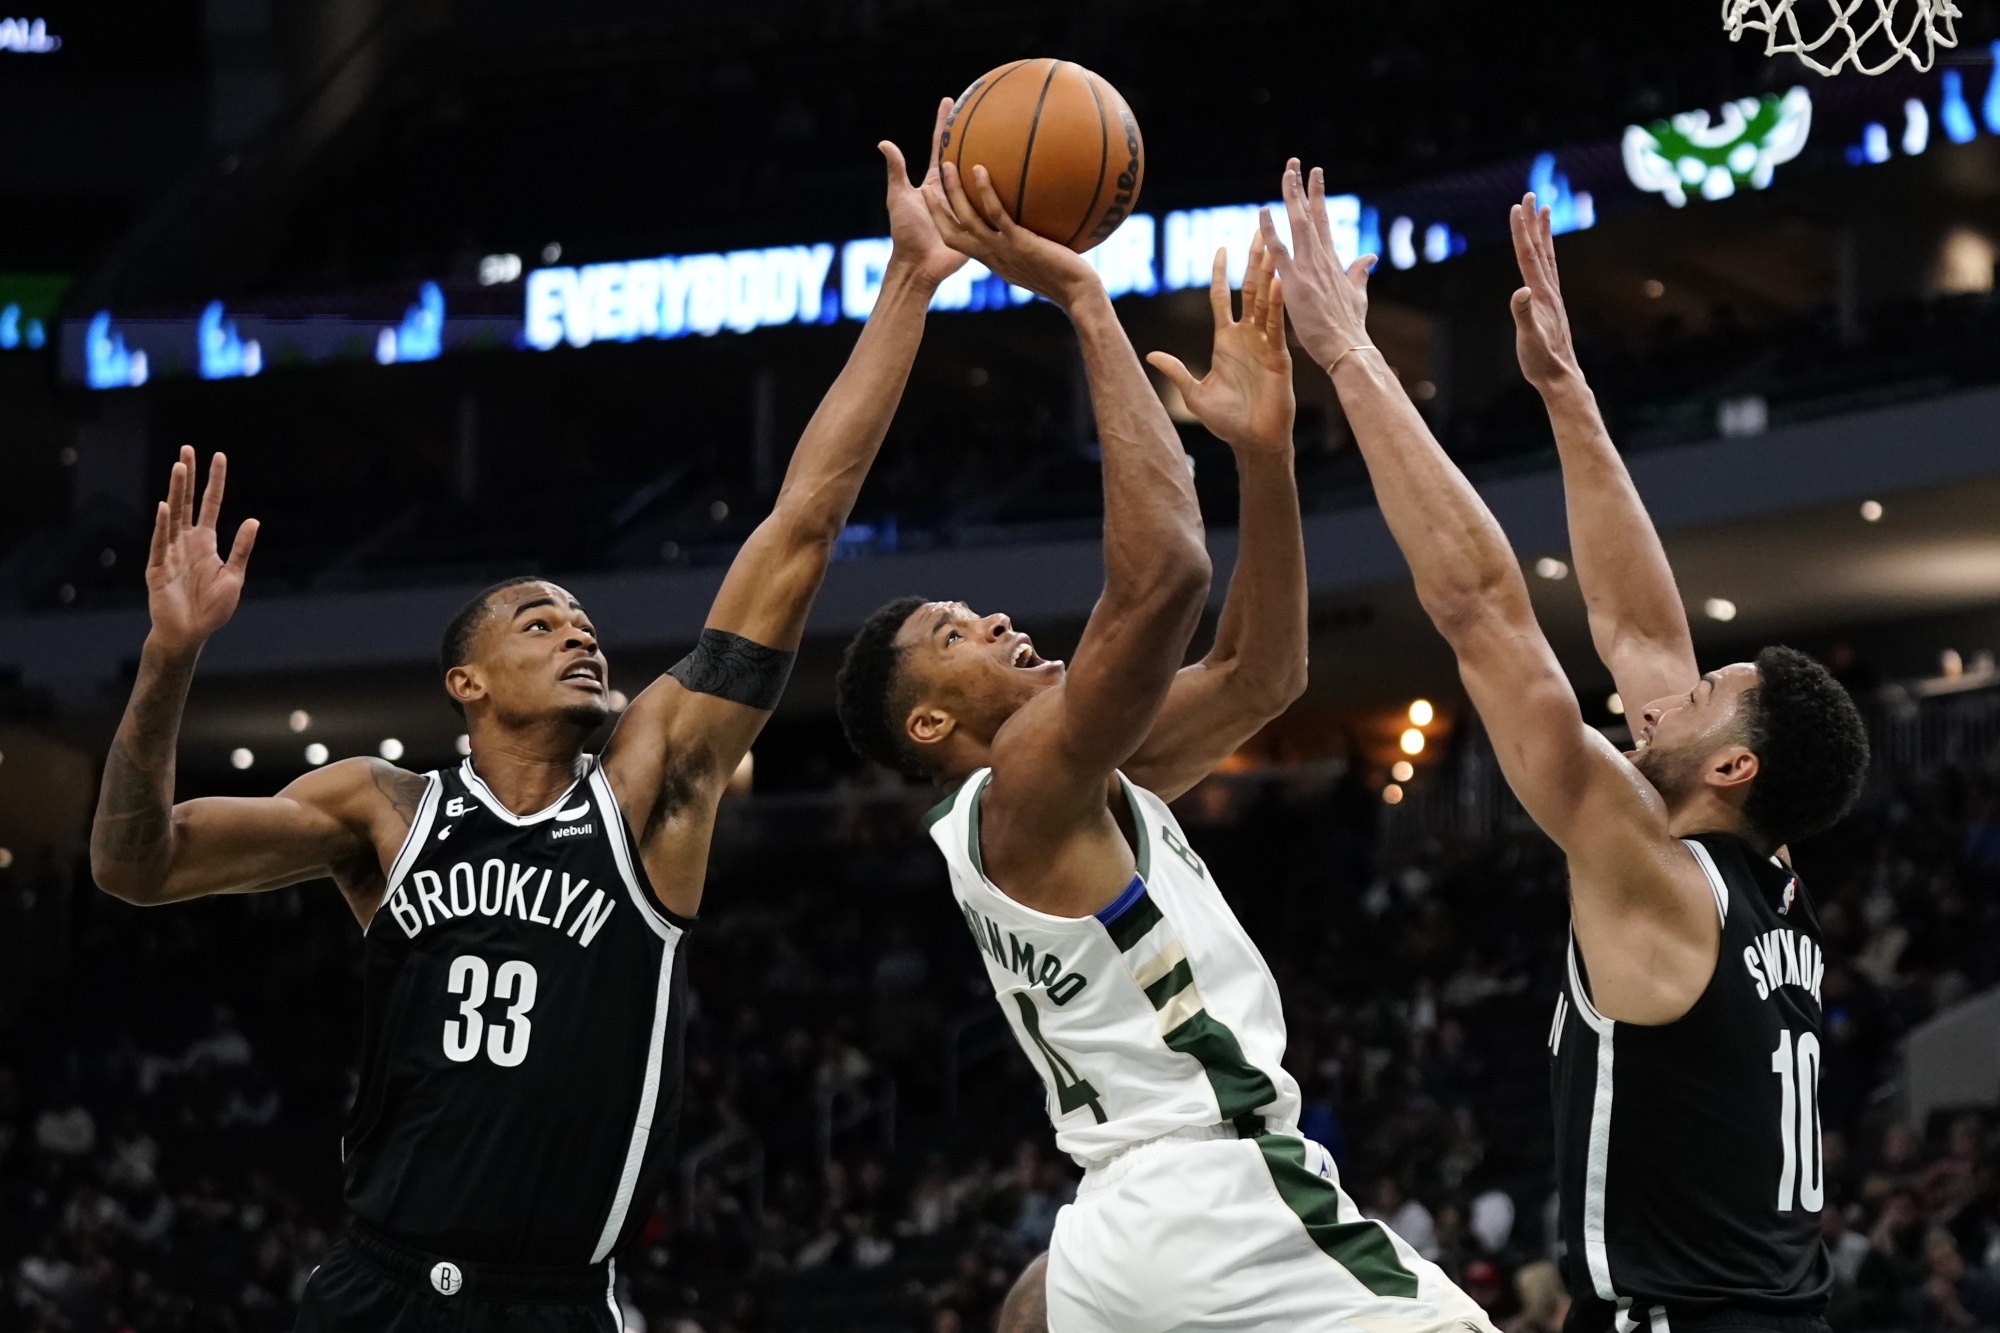 Giannis scores 33 to lead Bucks past Cavaliers to start trip